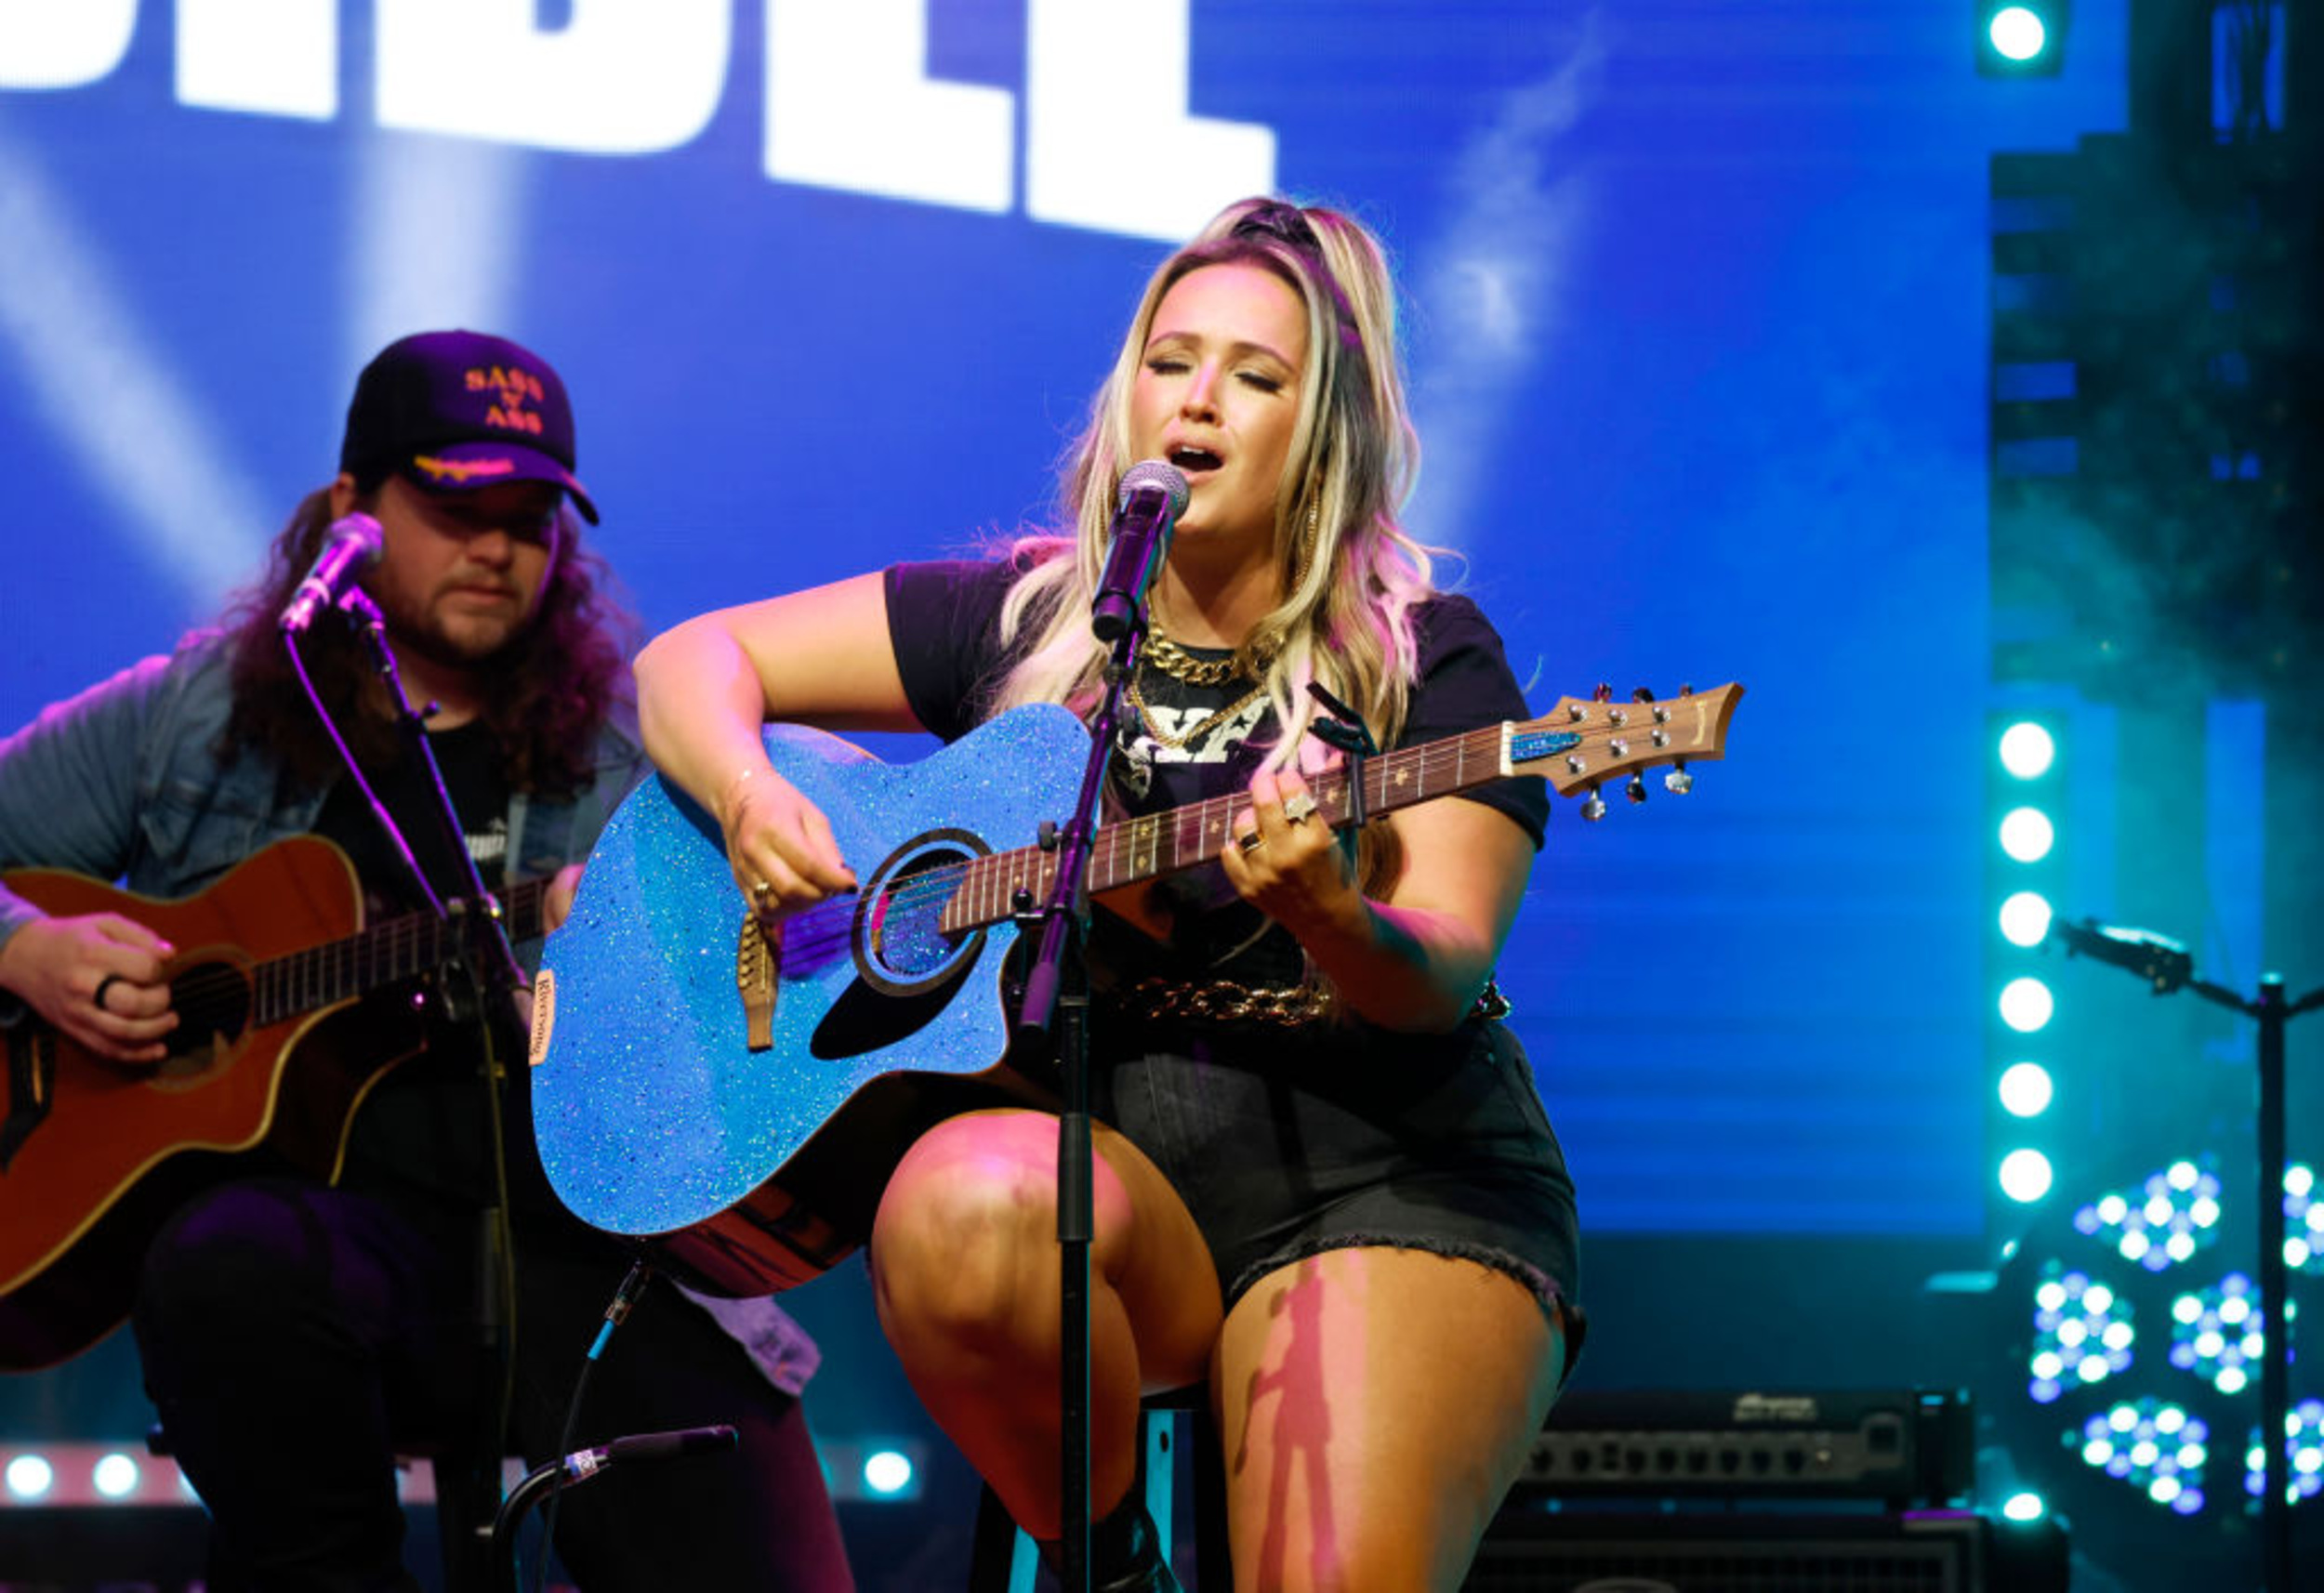 <p>She's already gone viral on TikTok and sold a ton of records, but for whatever reason, Priscilla Block isn't a household name just yet. That could all change in 2024, as she gears up for a really big year. She's headed out on a major North American tour in support of her song "Hey Jack," and fans are definitely going to fall in love with her hard-partying live show. </p><p>You may also like: <a href='https://www.yardbarker.com/entertainment/articles/warm_fuzzy_celebrities_with_famous_facial_hair/s1__31304540'>Warm & fuzzy: Celebrities with famous facial hair</a></p>